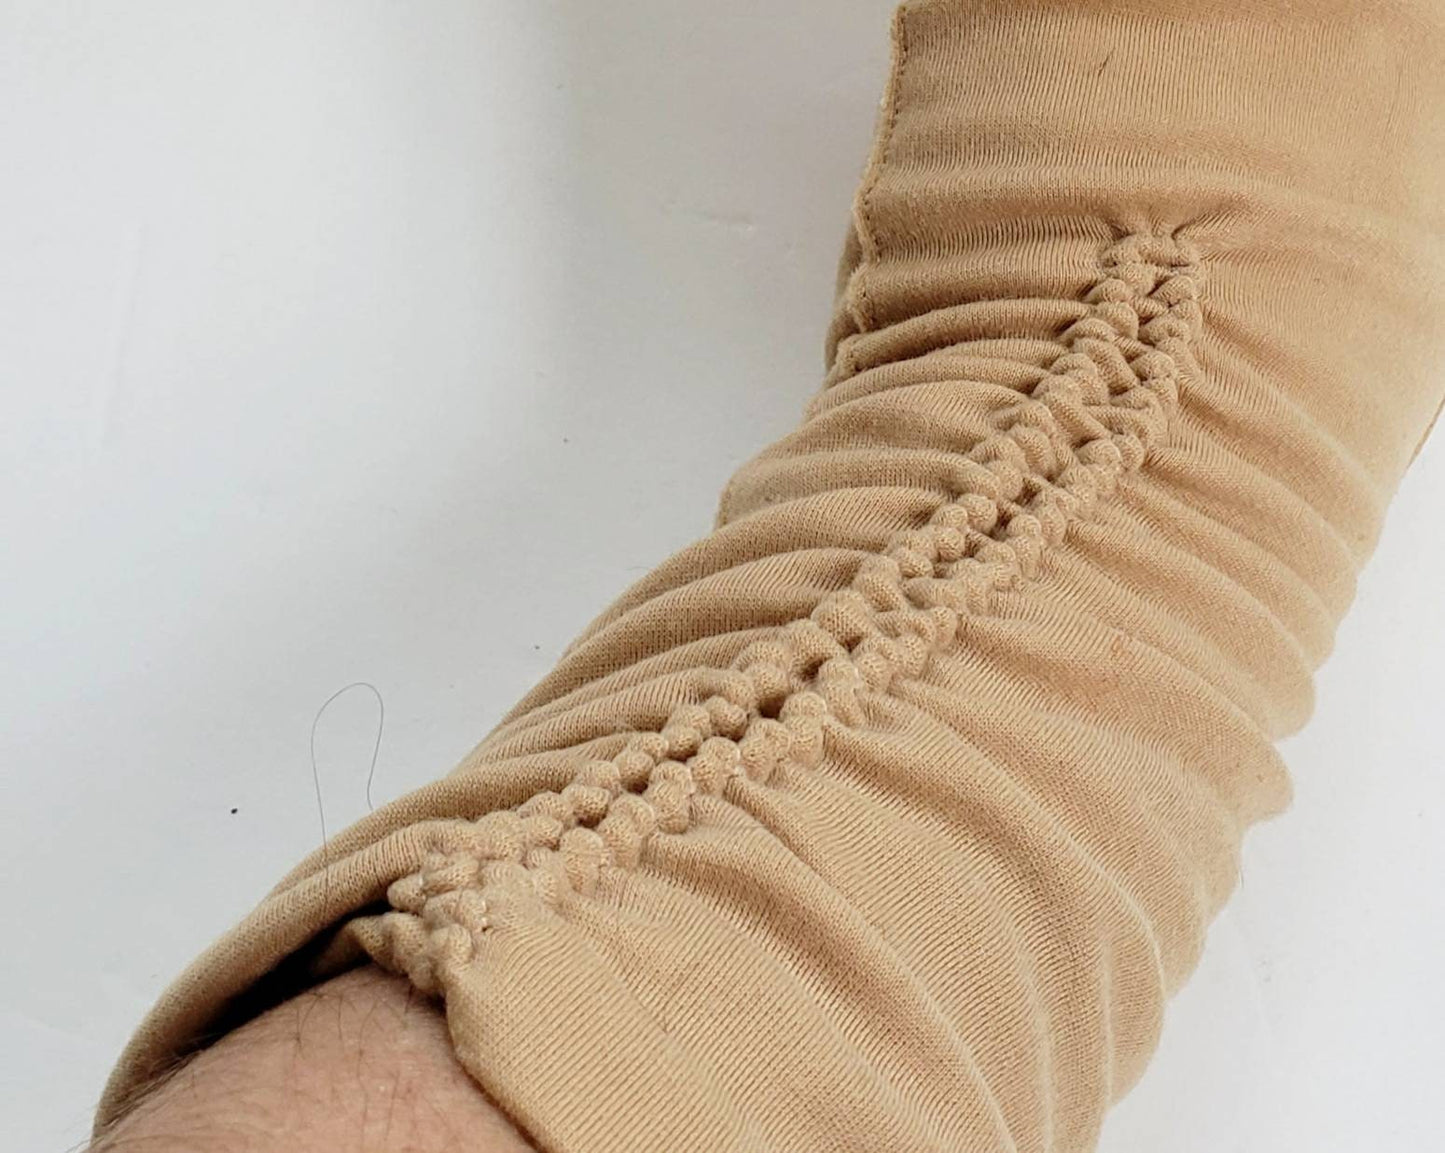 1950s Beige Gloves Ruched Elastic Design / 50s Three Quarters Length Day Gloves Light Tan / Jacqui